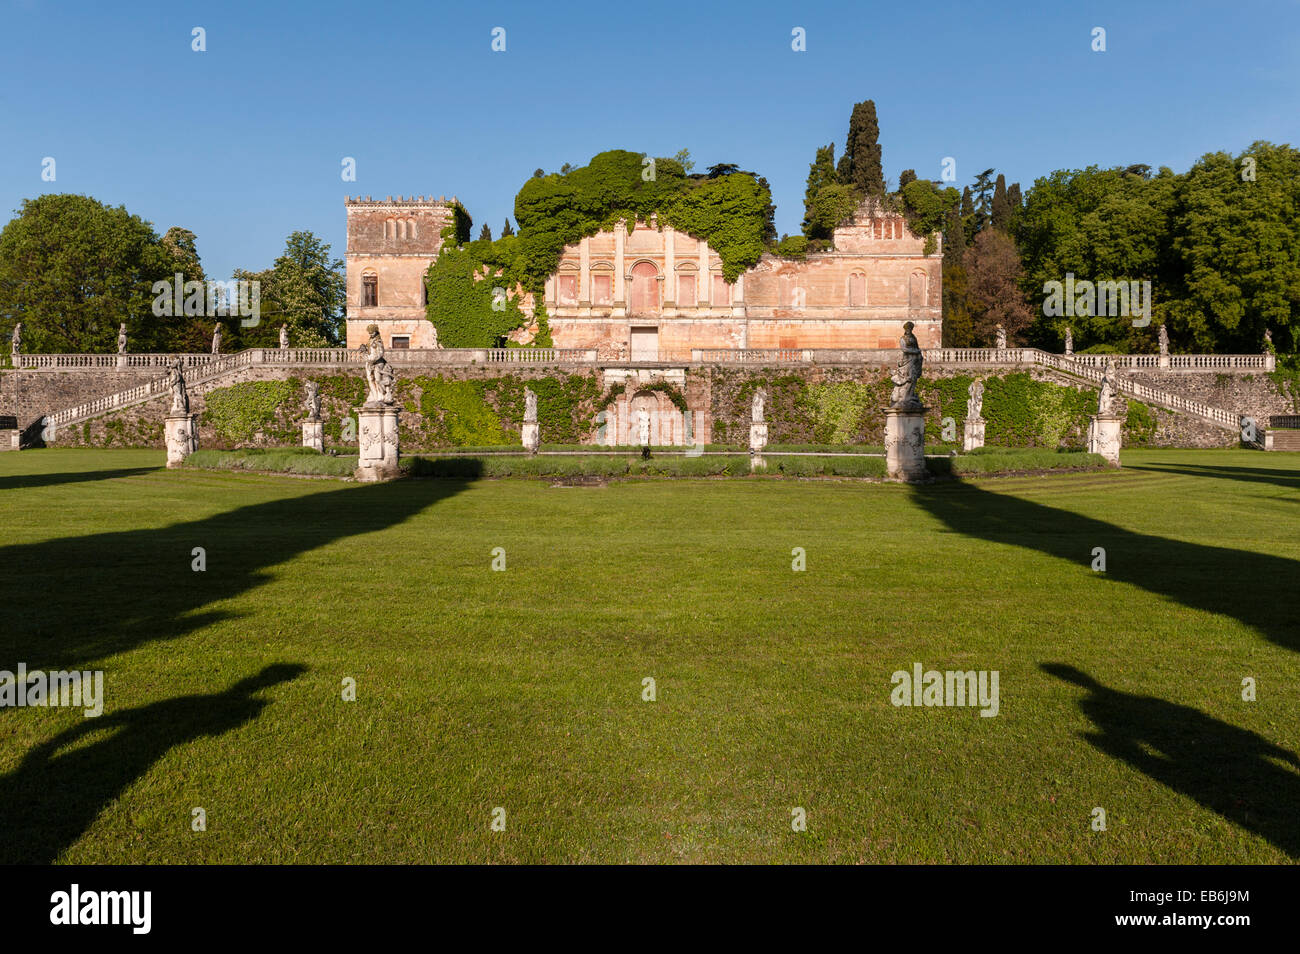 The gardens of the 18c Villa Trissino Marzotto, Vicenza, Italy. The garden below the ruined lower villa is filled with statues by Orazio Marinali Stock Photo